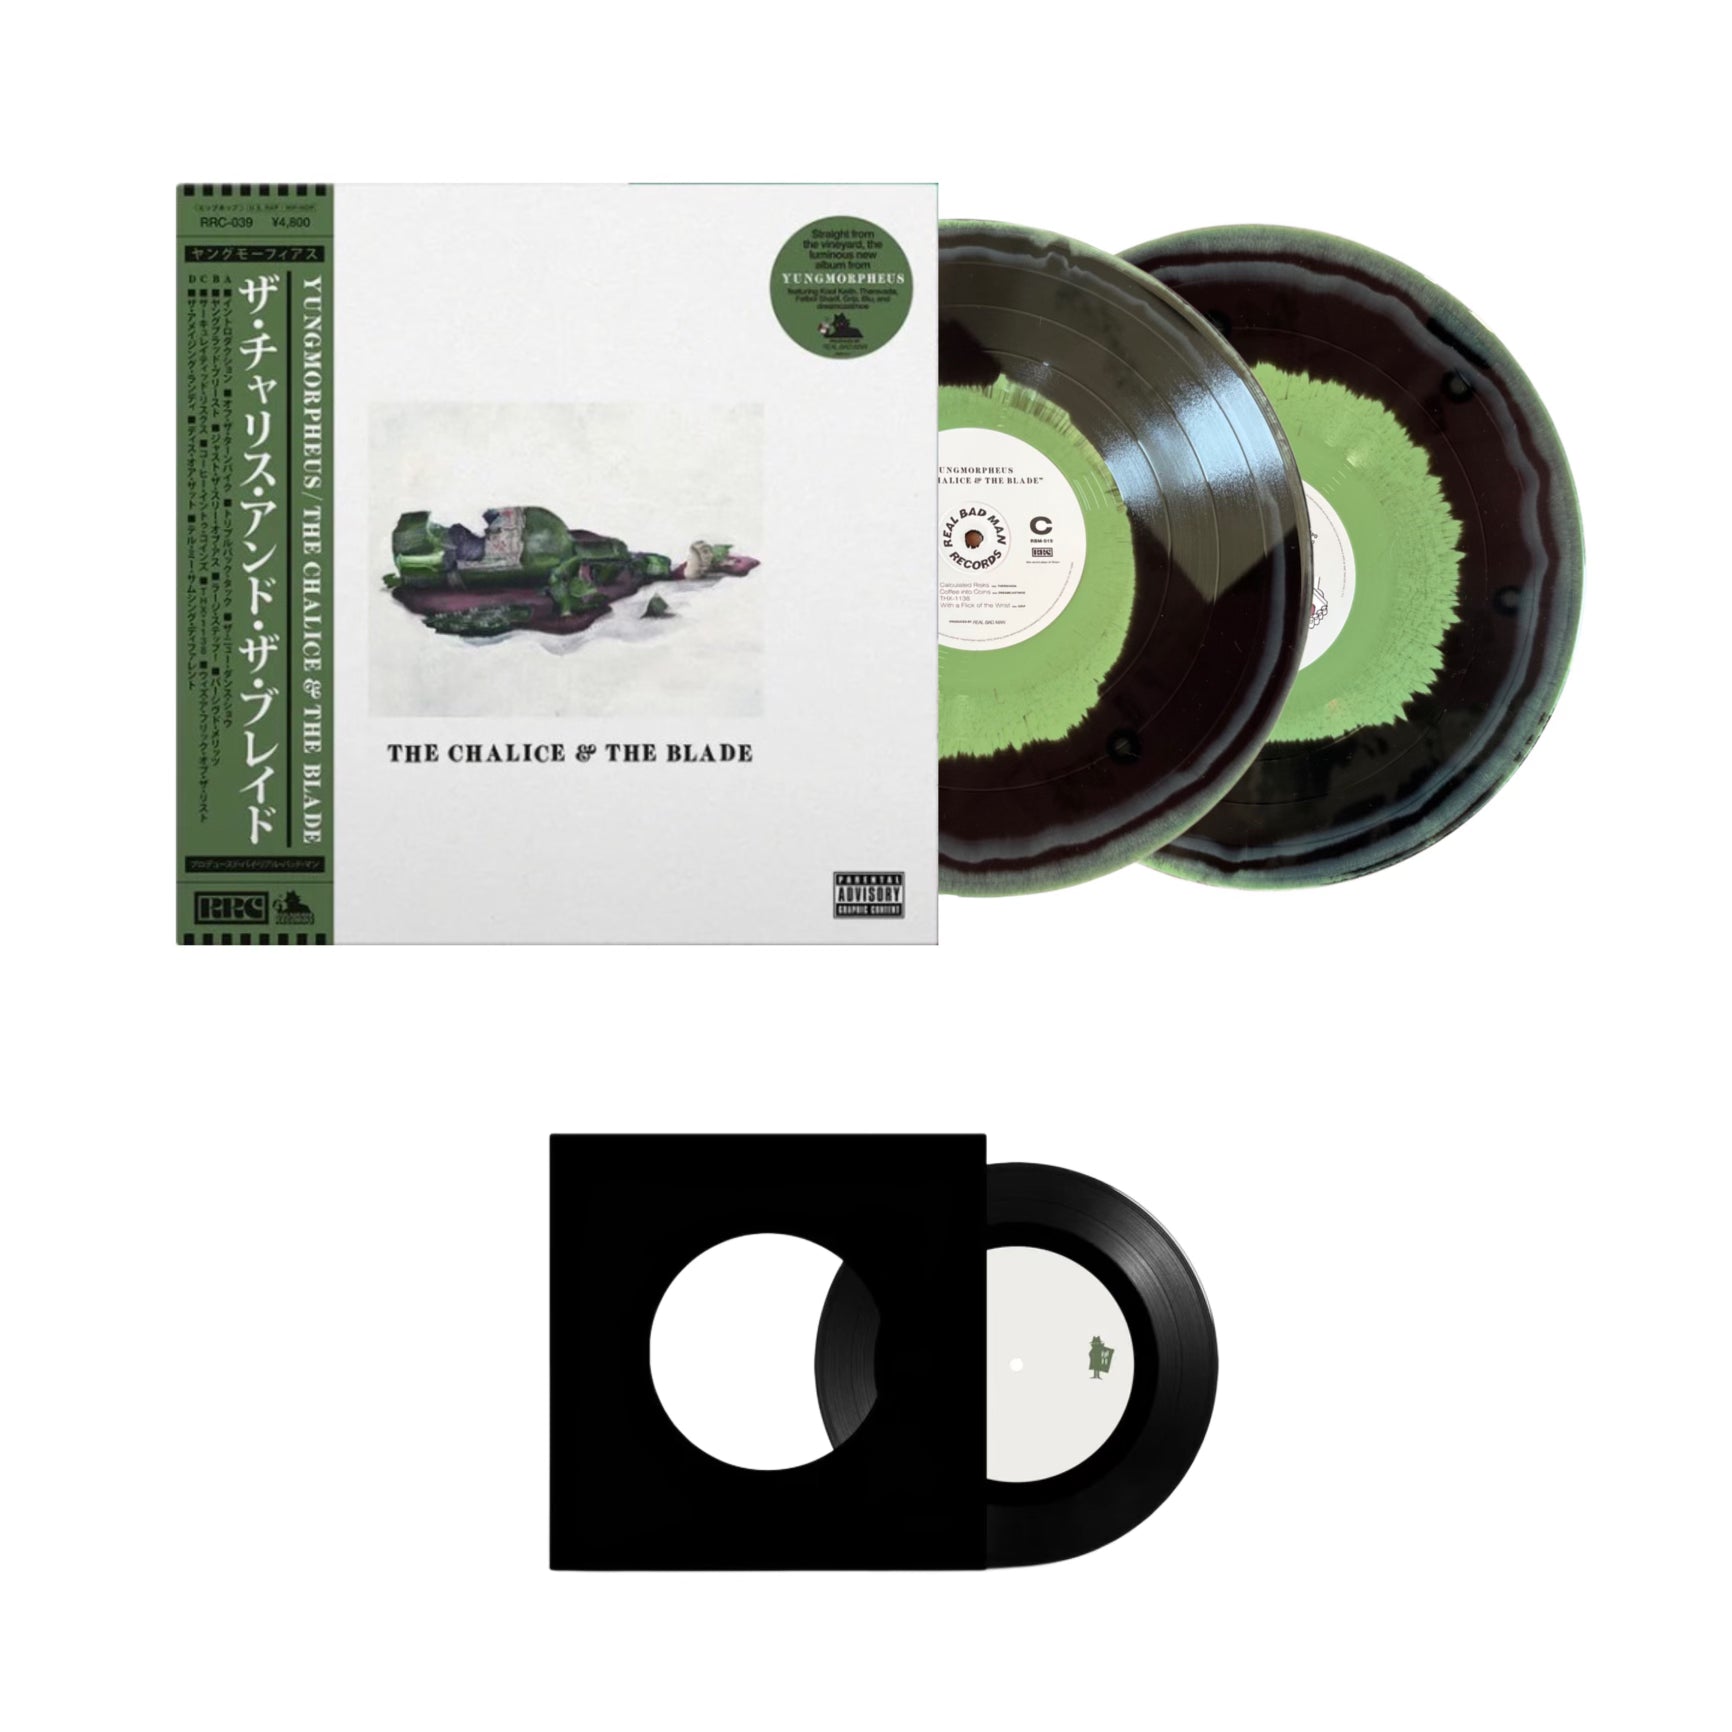 YUNGMORPHEUS & Real Bad Man – The Chalice and the Blade (BLACK/GREEN VINYL)